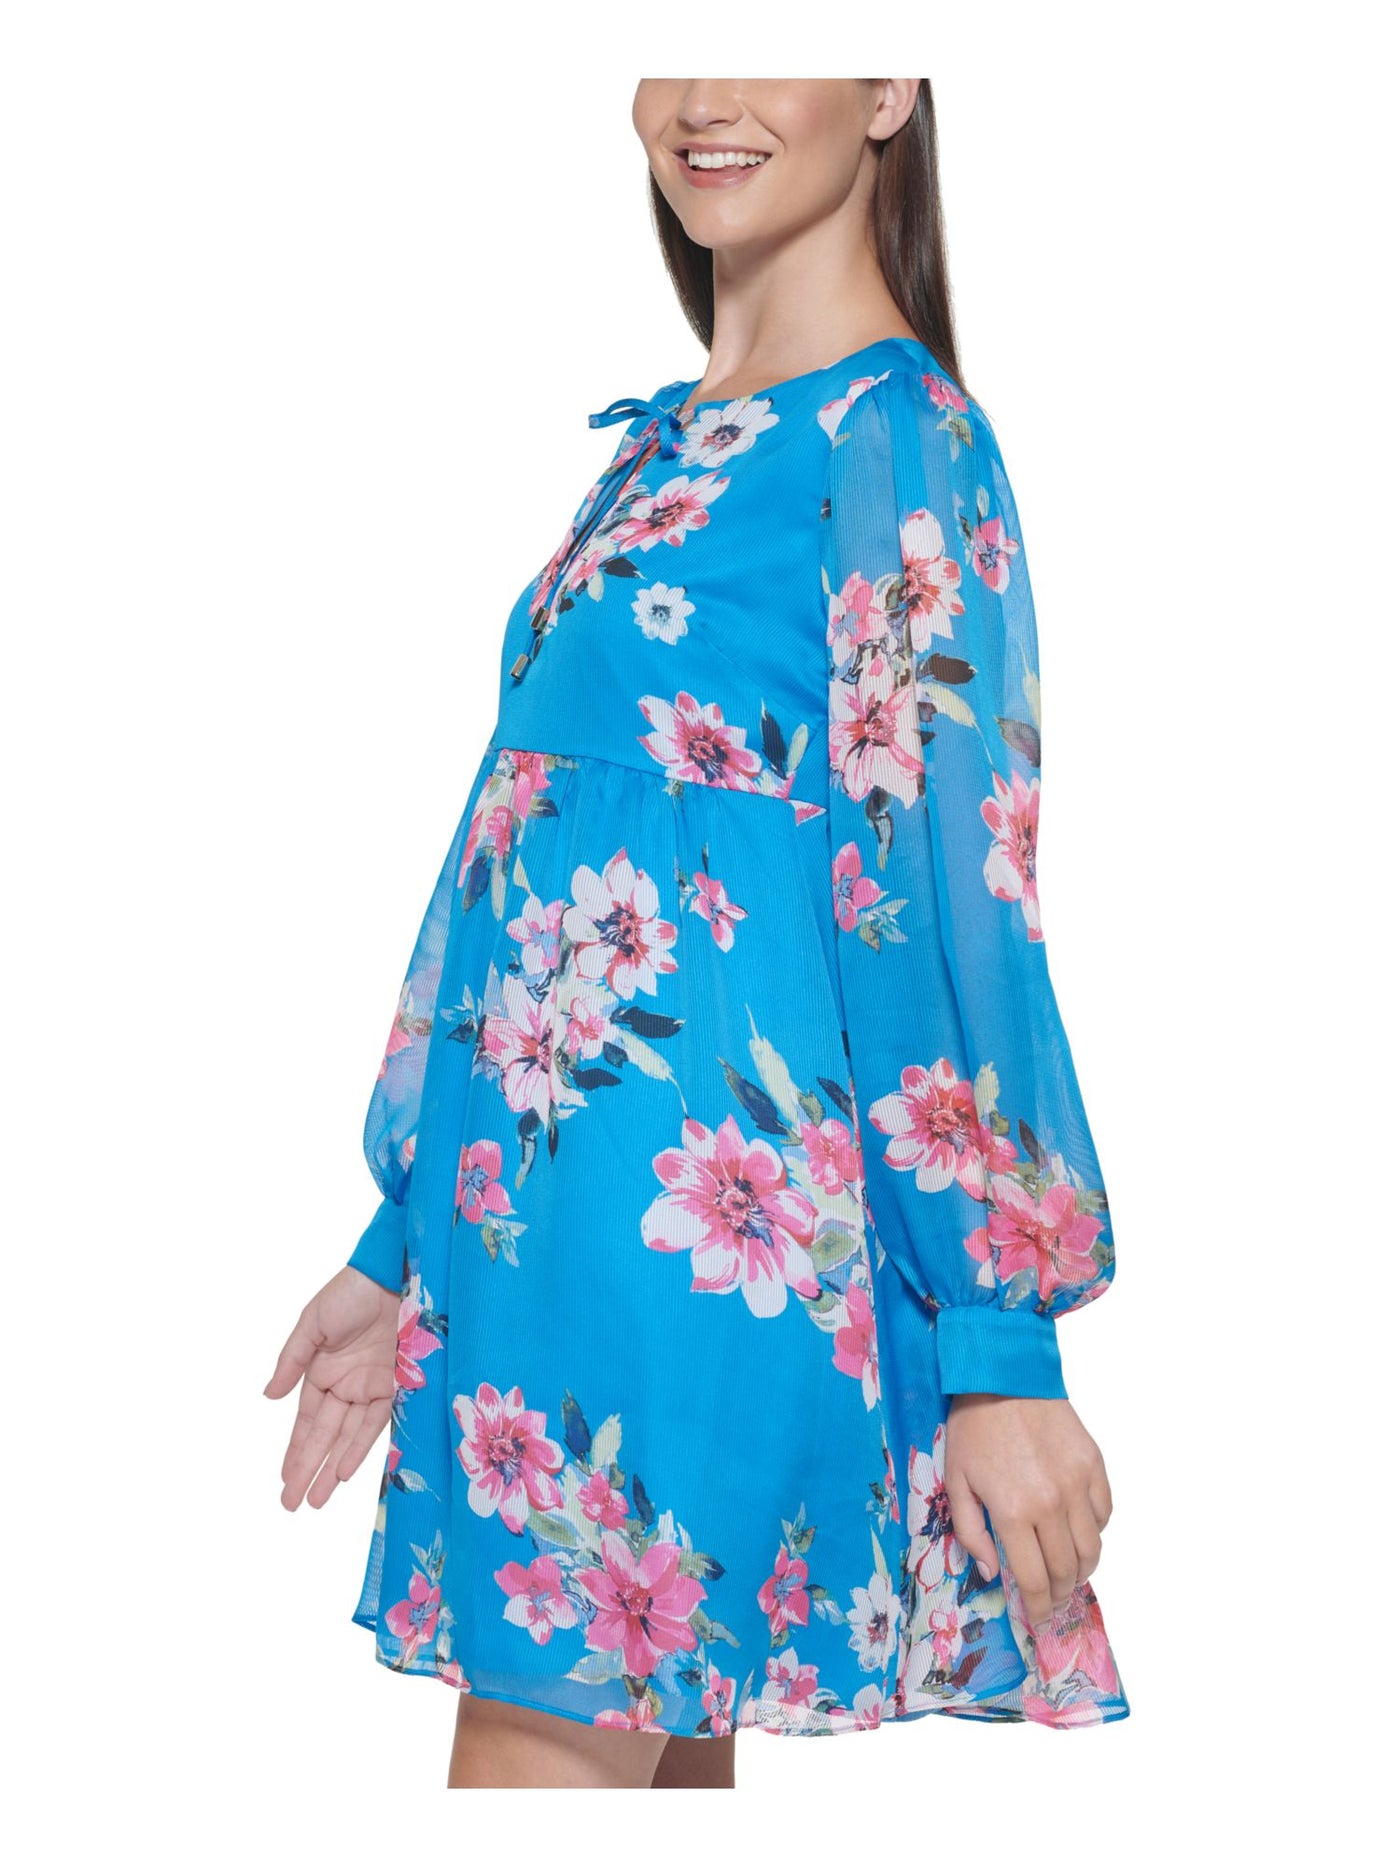 KENSIE DRESSES Womens Blue Ribbed Lined Floral Cuffed Sleeve Tie Neck Above The Knee Party Shift Dress 8